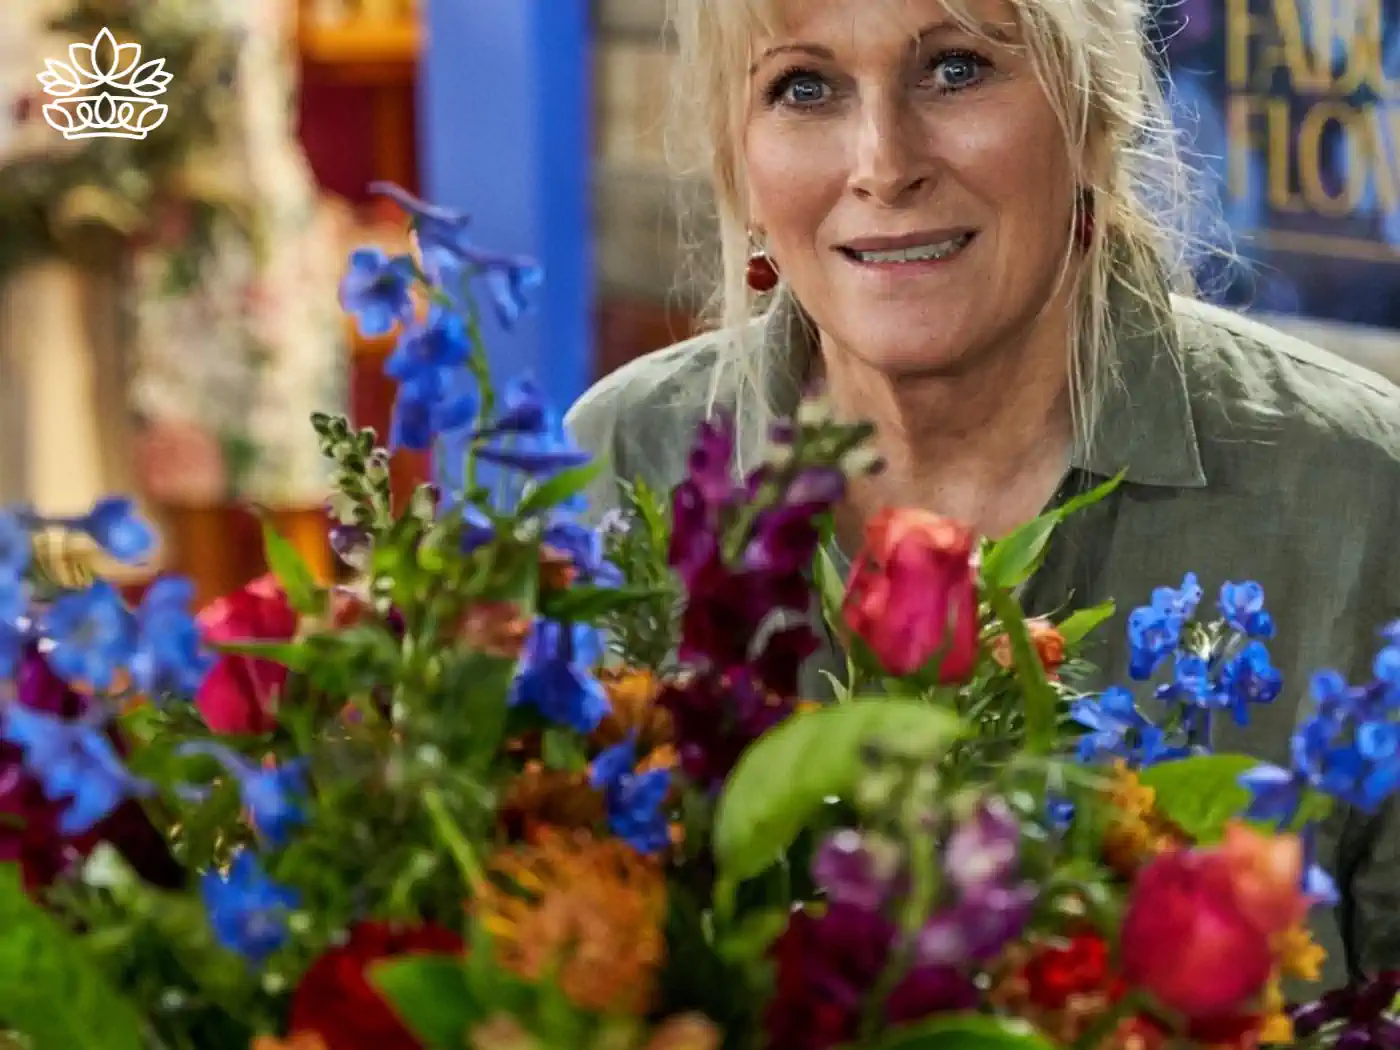 Florist arranging a stunning display of multicoloured flowers with a focused expression. Fabulous Flowers and Gifts, Luxury Flower Arrangements.